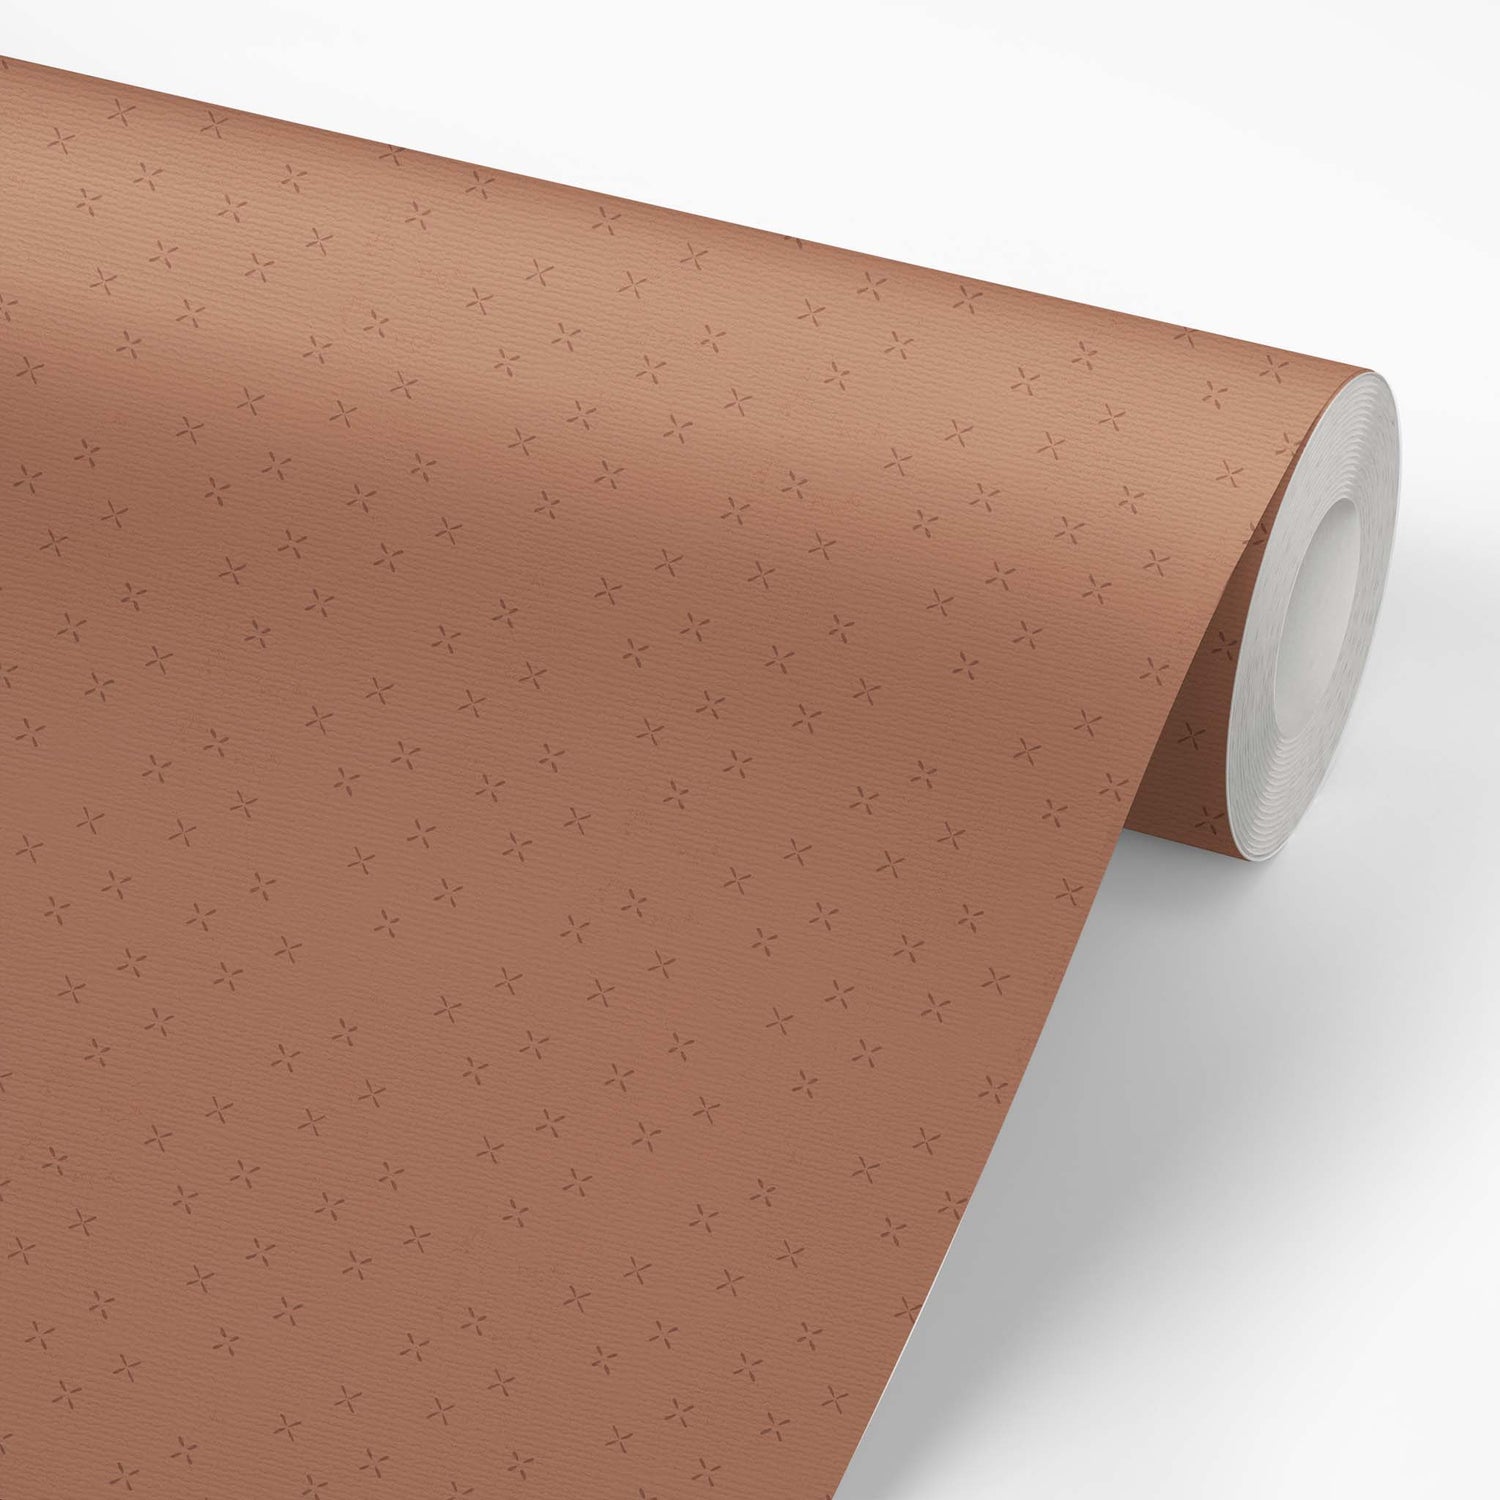 Wallpaper panel featuring Cayla Naylor Cordova-Clay Peel and Stick Wallpaper - a minimalist pattern